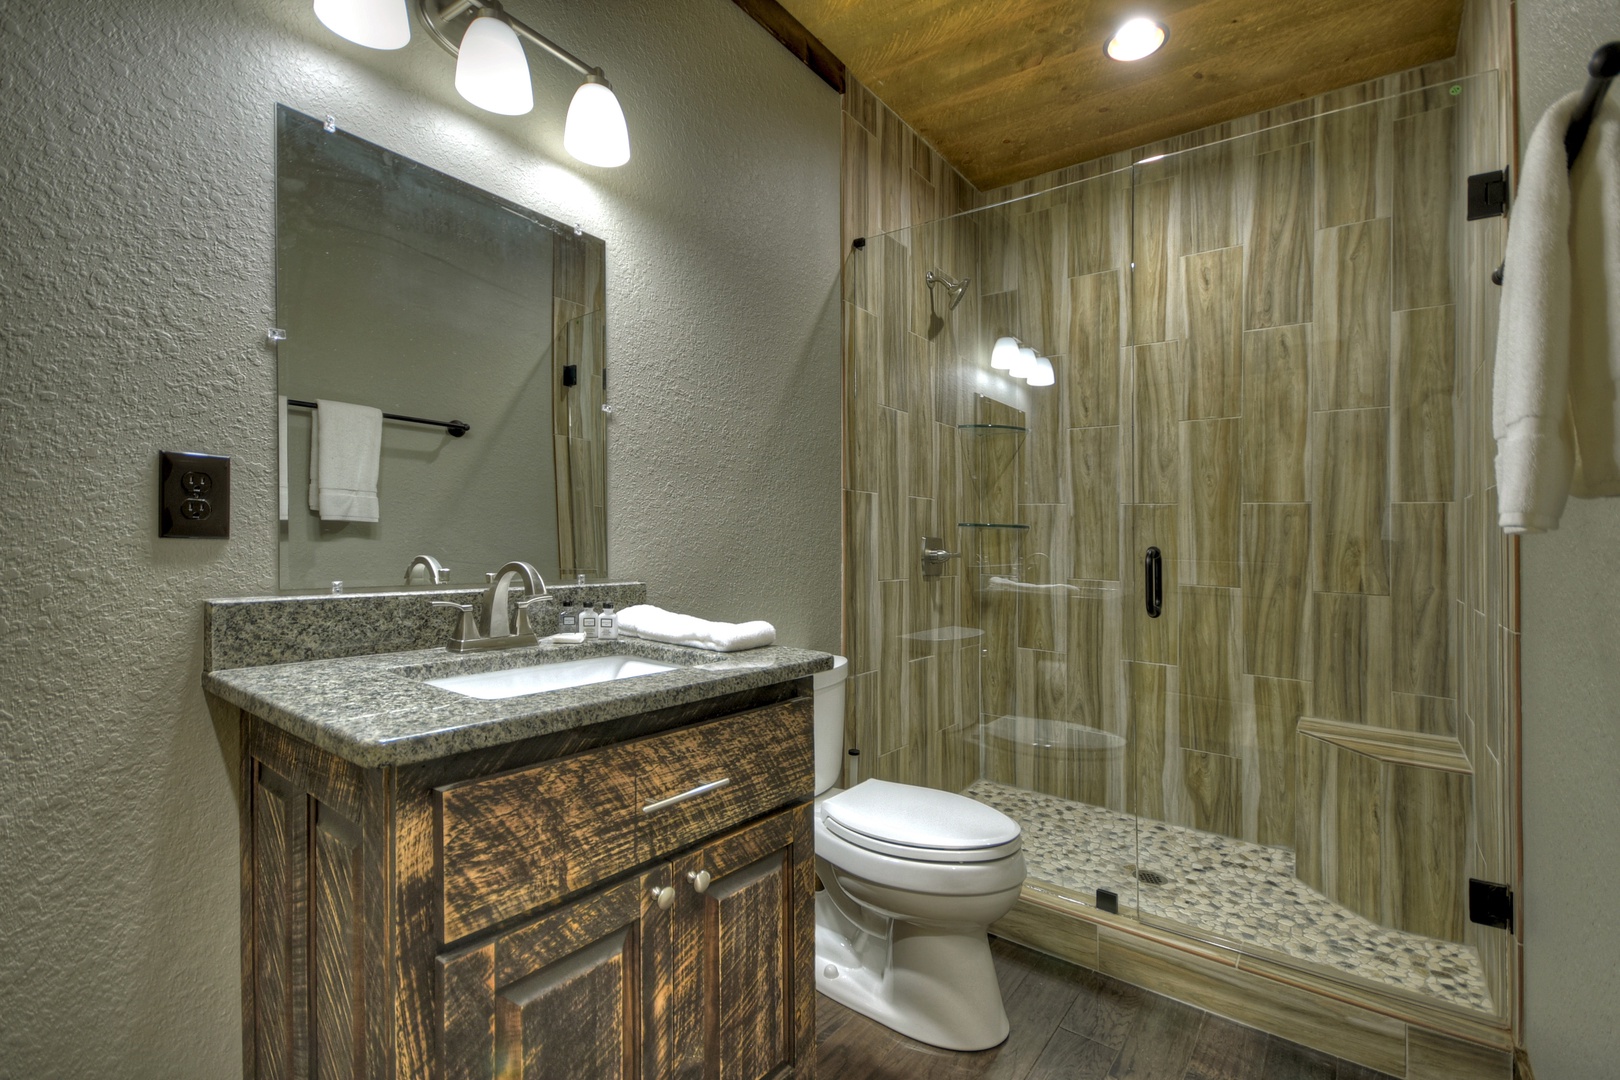 New Heights- Lower level full bathroom with a vanity sink, toilet and walk in shower